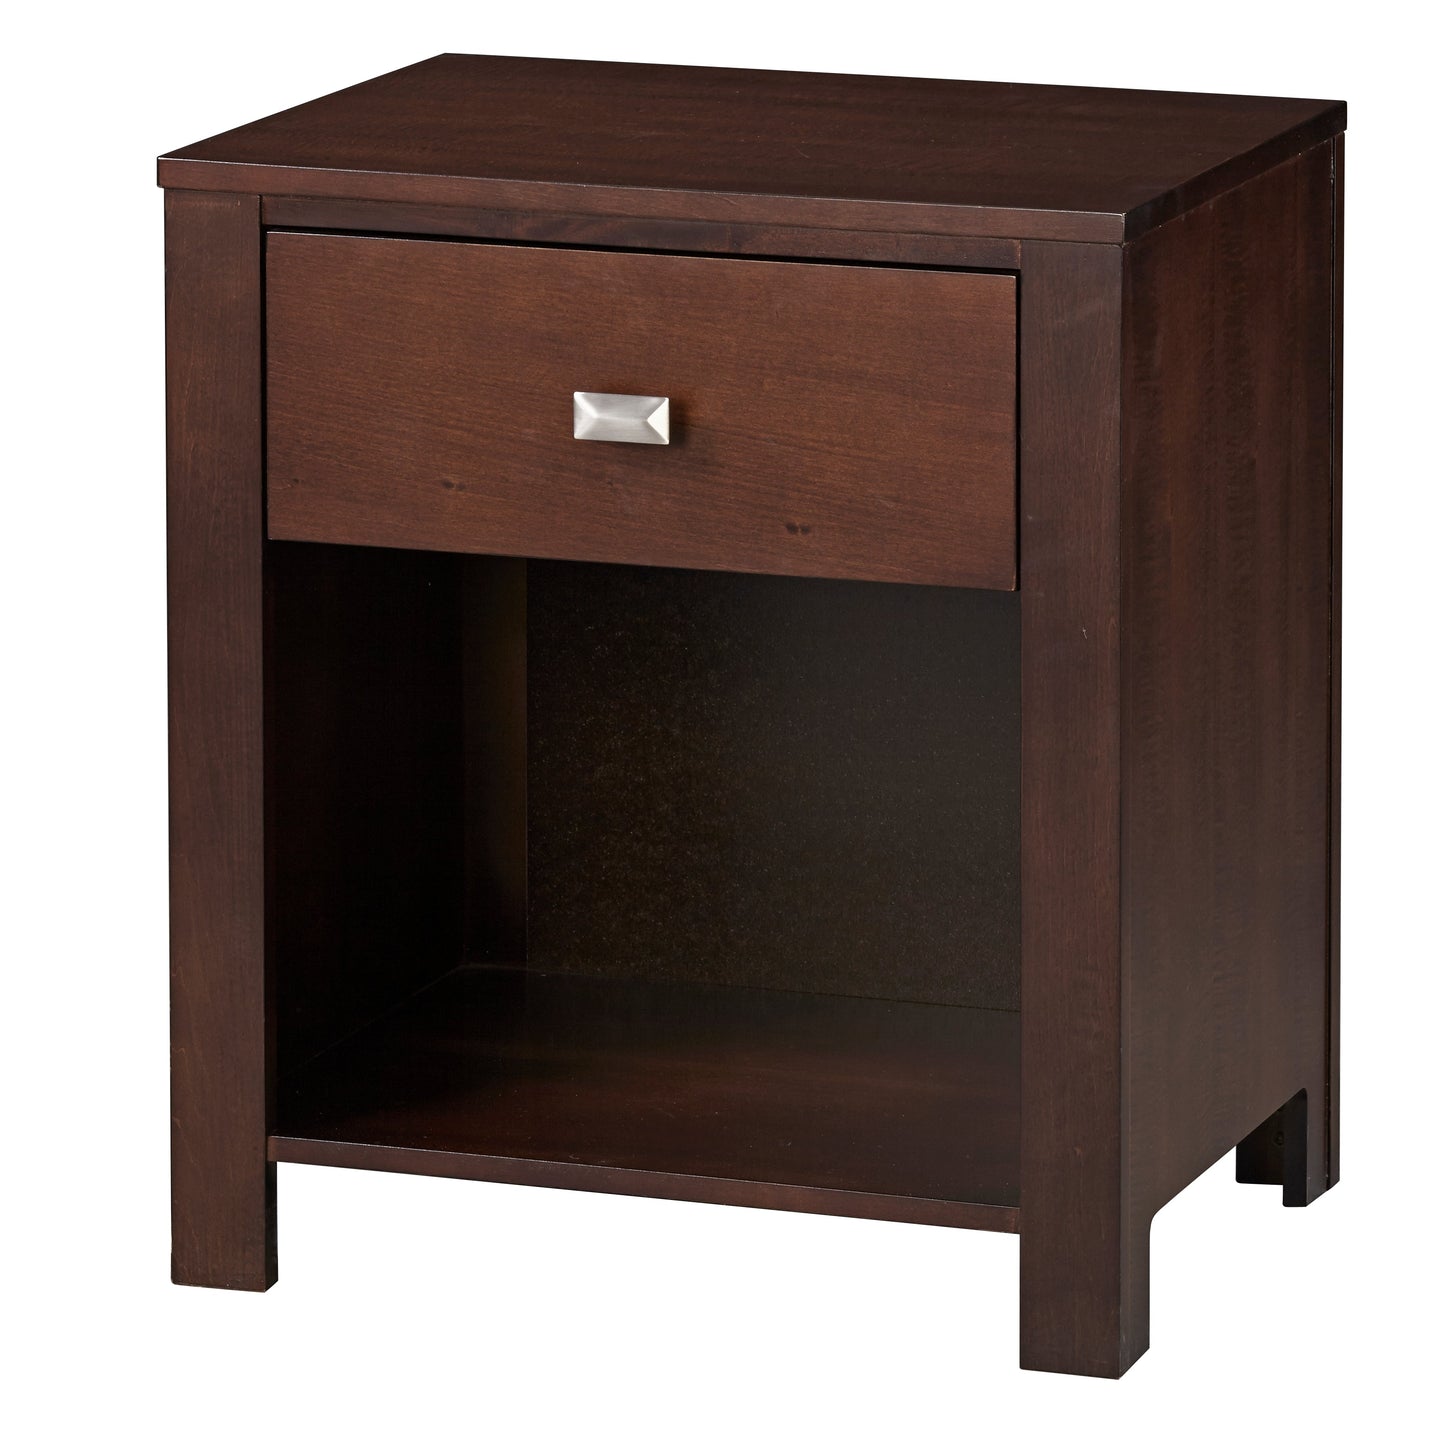 Modus Riva Nightstand in Chocolate Brown